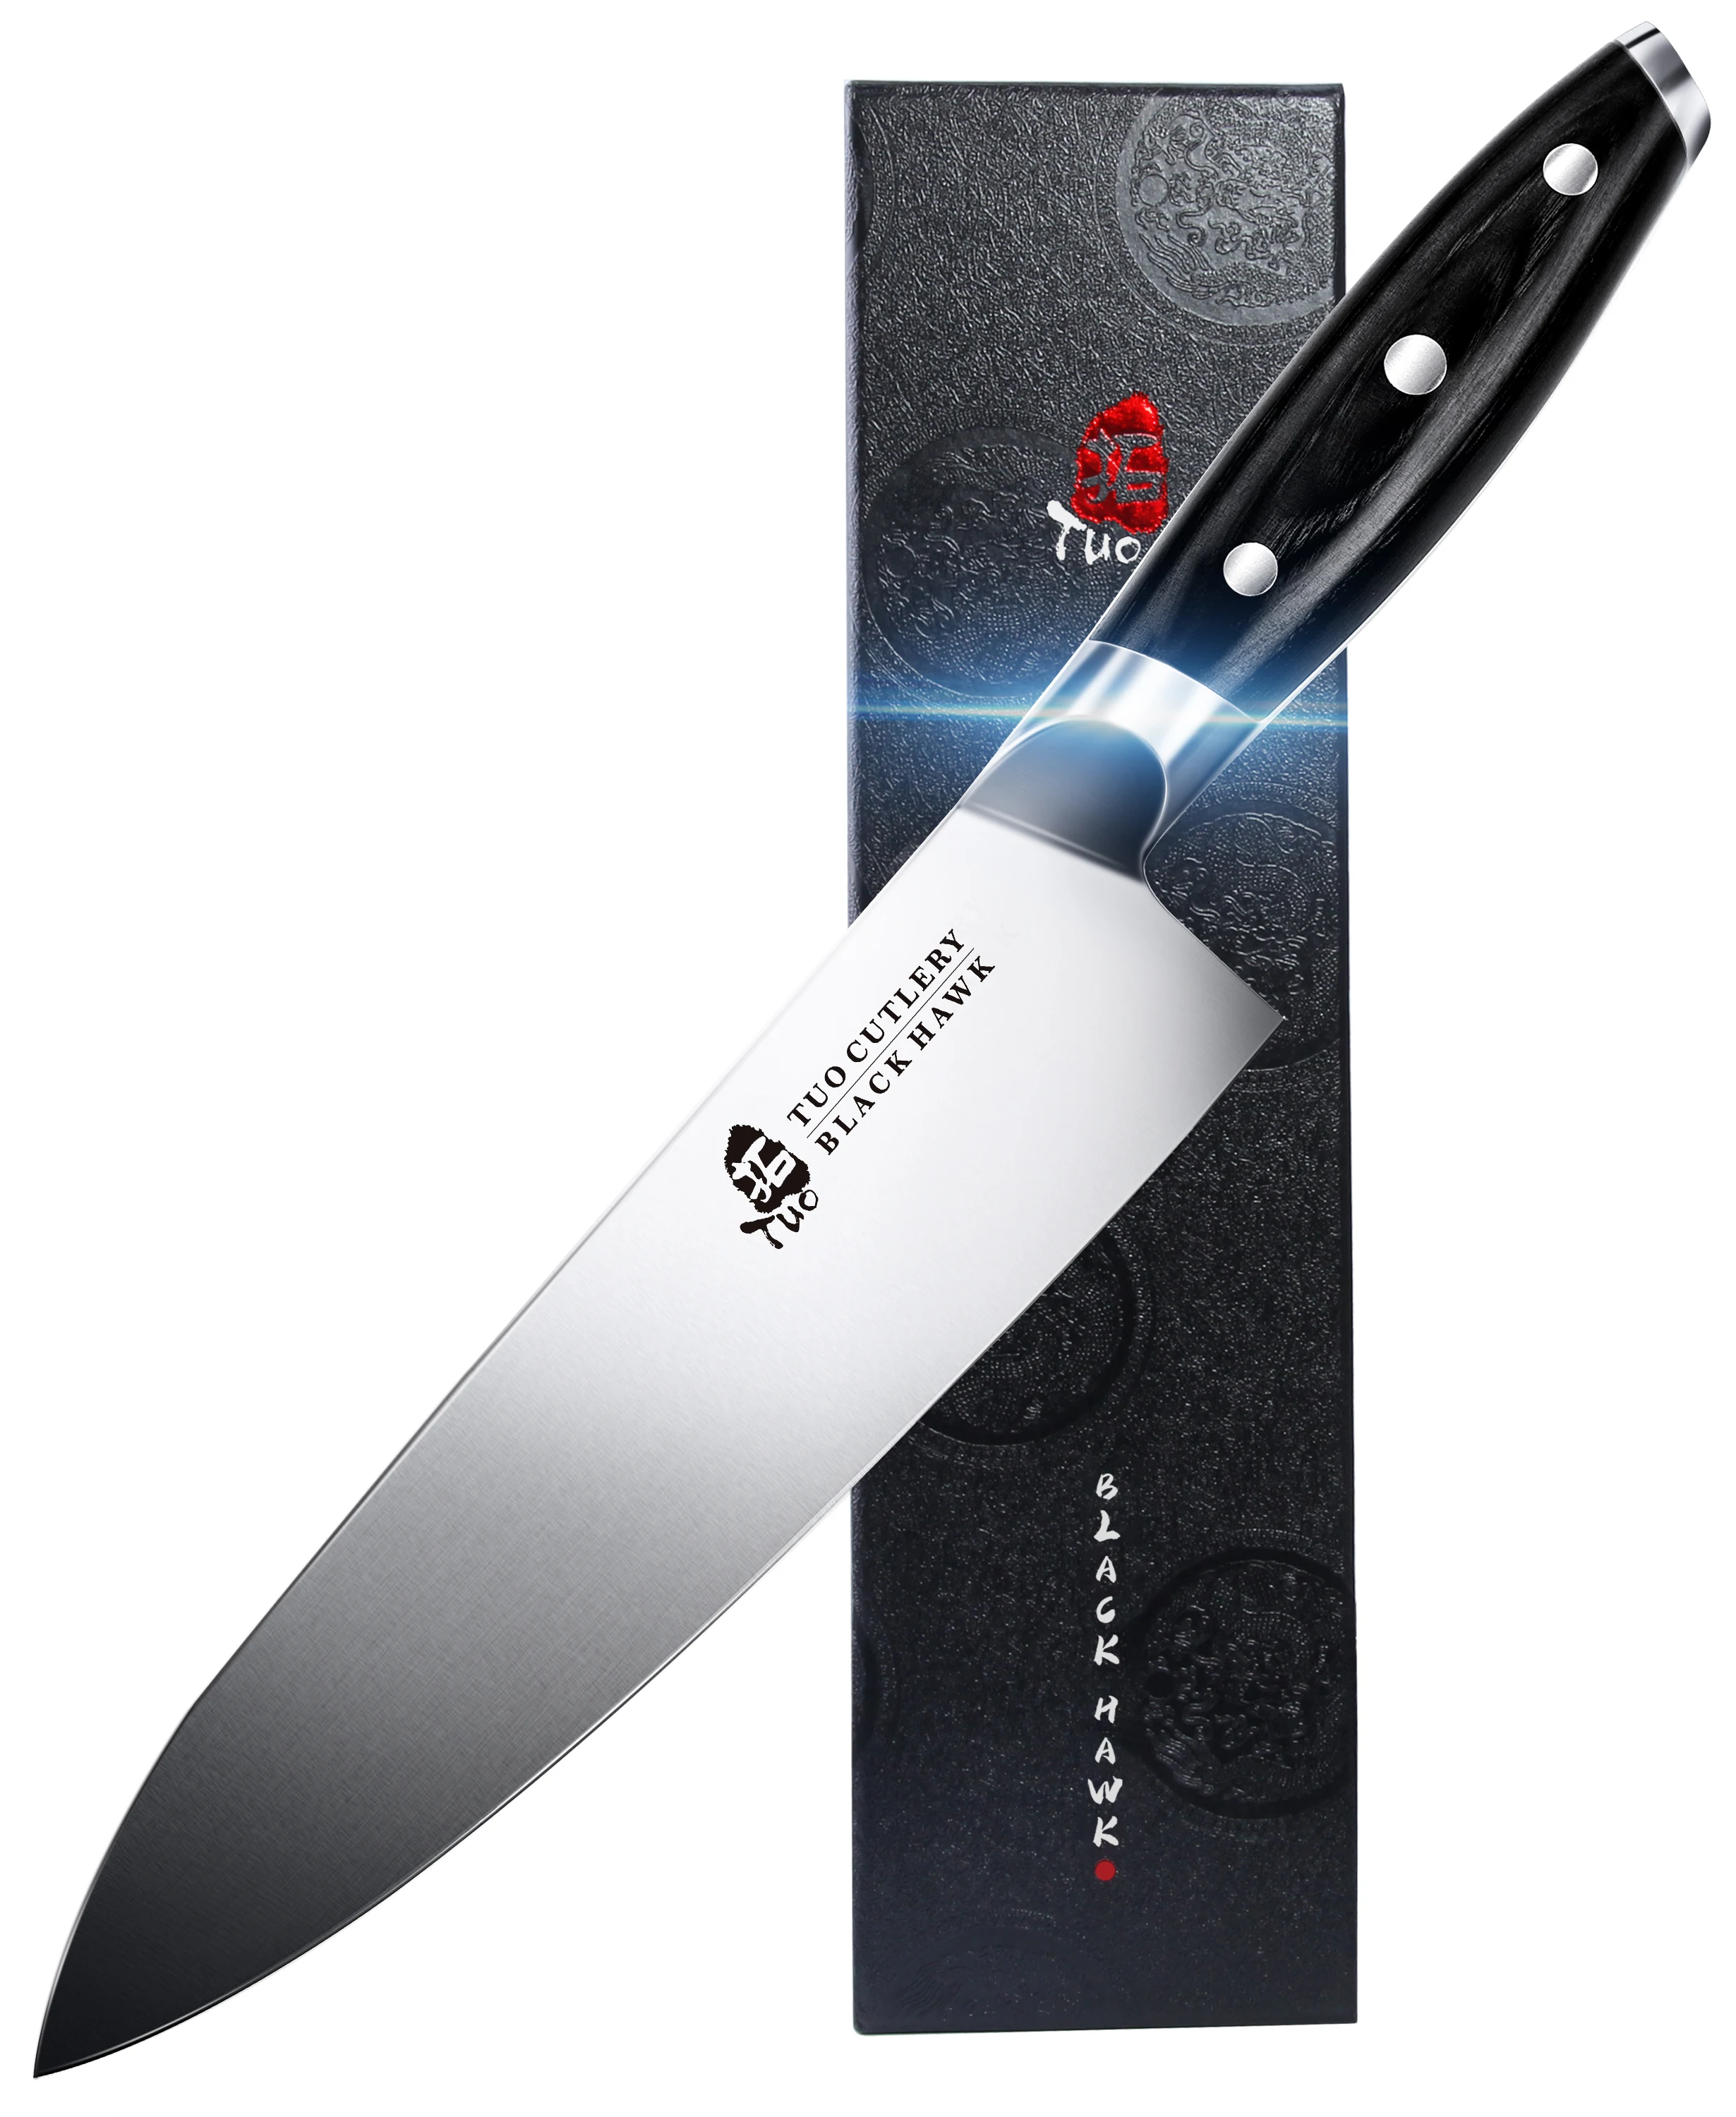 TUO Chef knife- Professional 8 inch Pro Chef Kitchen Knife- High Carbon German Stainless Steel- Meat and Vegetable Knife